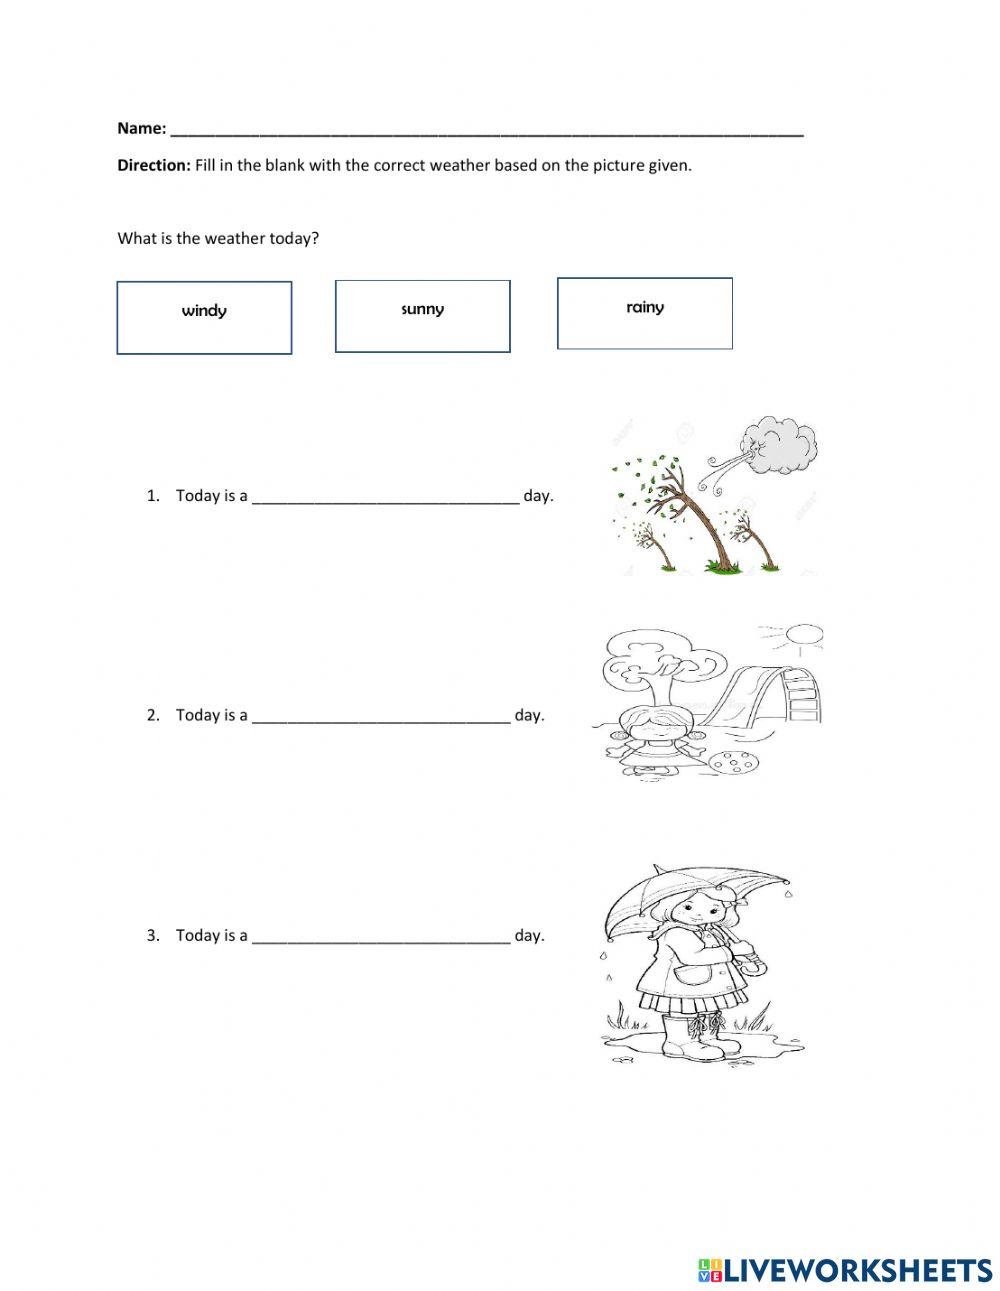 Tick boxes, fill in the blanks, selection worksheet